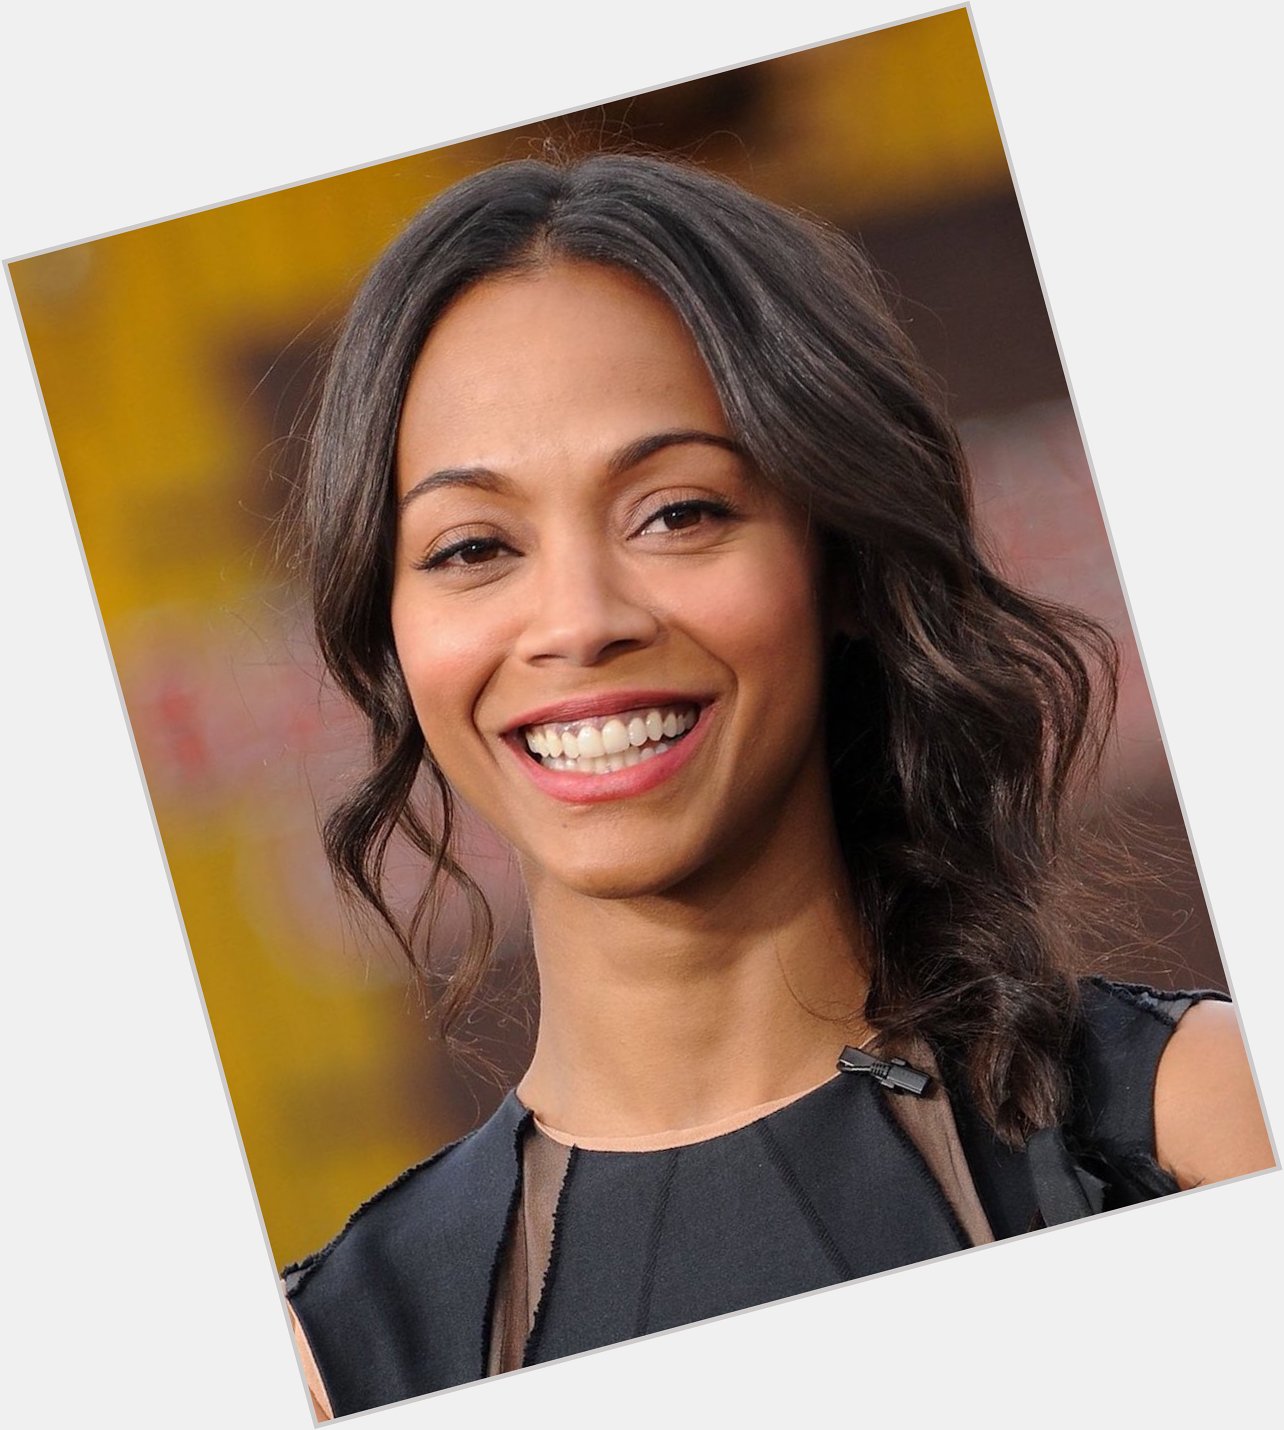 Zoe saldana has been in not one but two (2) movies that broke the box office. happy birthday, queen. 